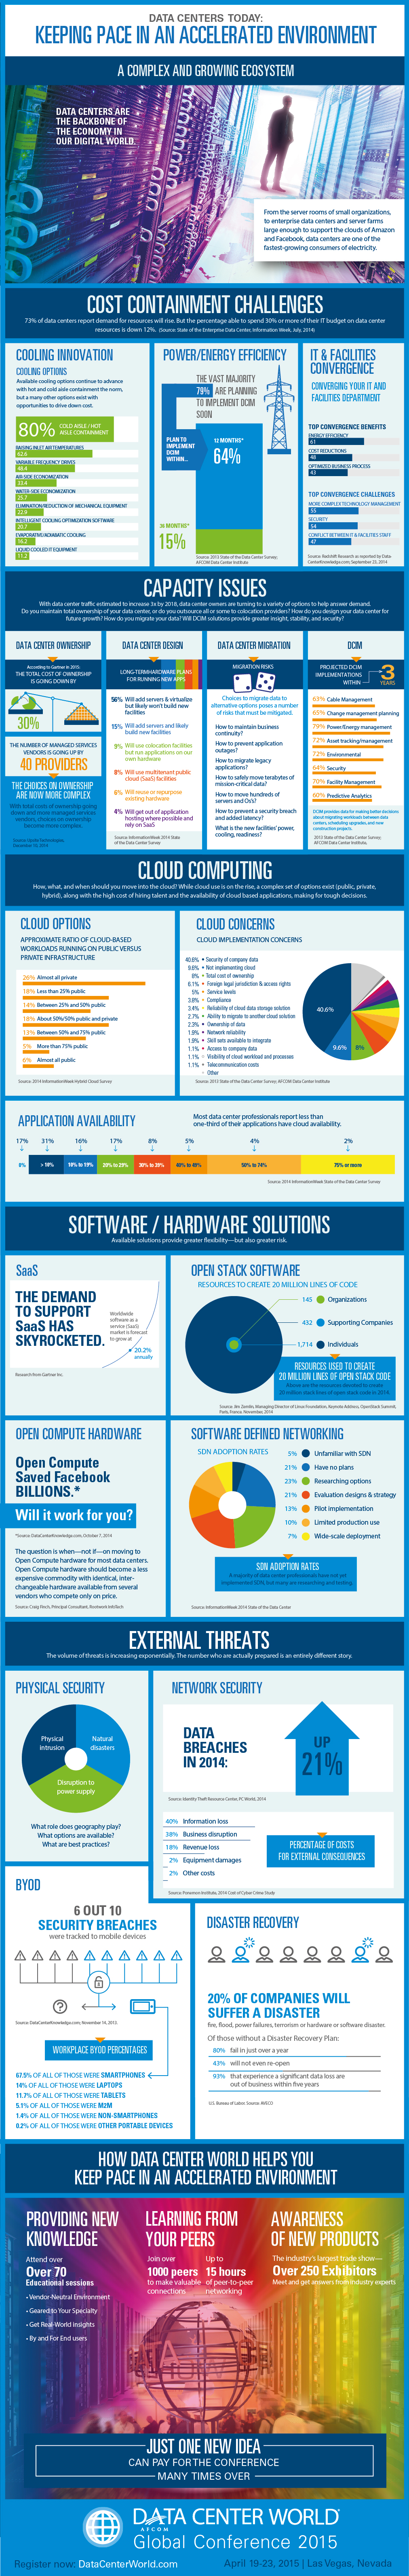 Infographic from AFCOM Data Center World.